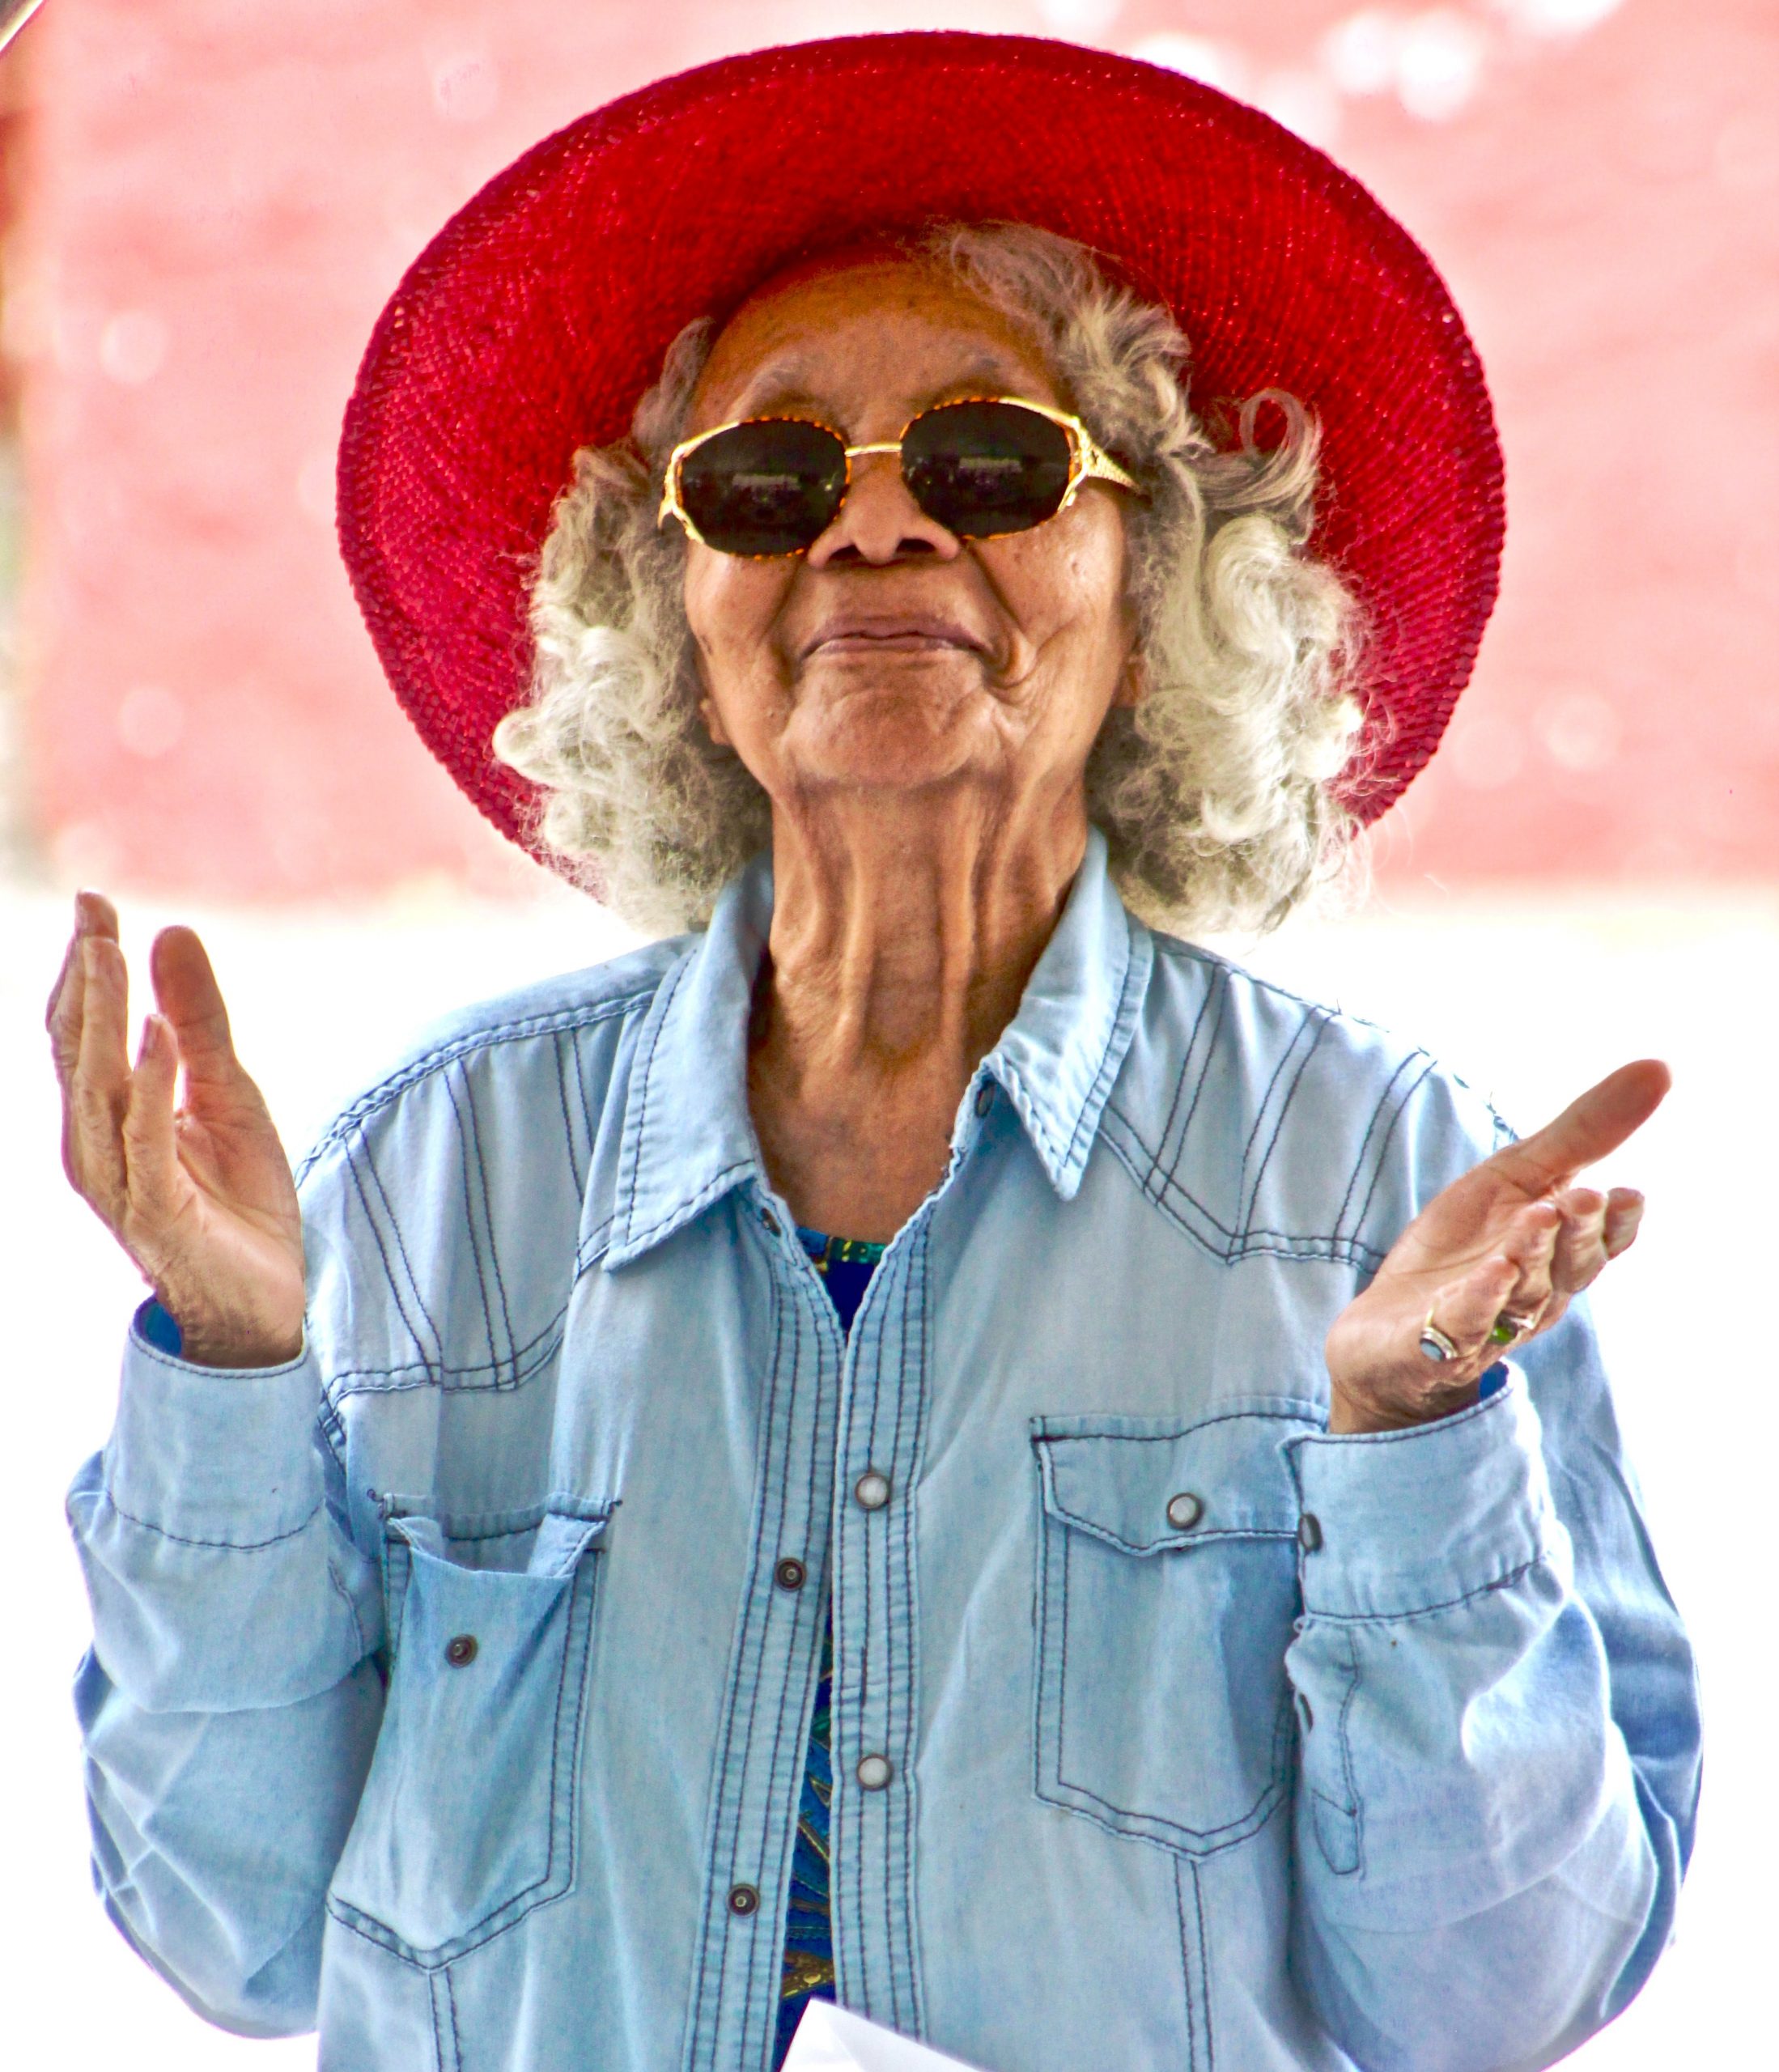 Elderly woman with red sun hat, looking slightly confused. Many people are similarly confused about Myrbetriq, a treatment option for overactive bladder.